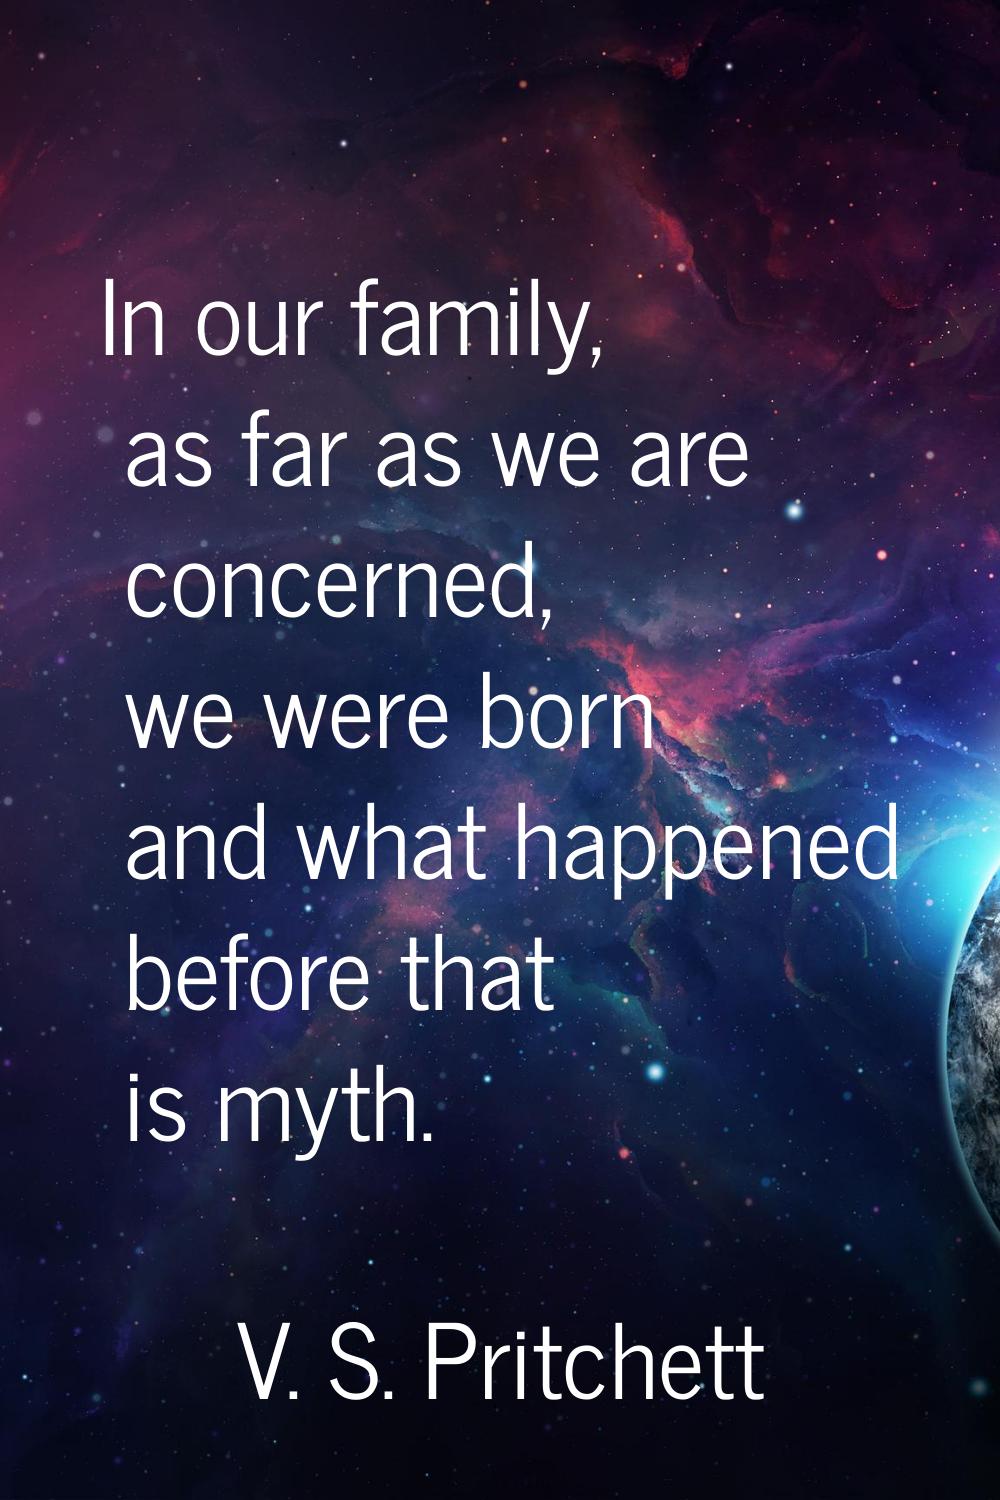 In our family, as far as we are concerned, we were born and what happened before that is myth.